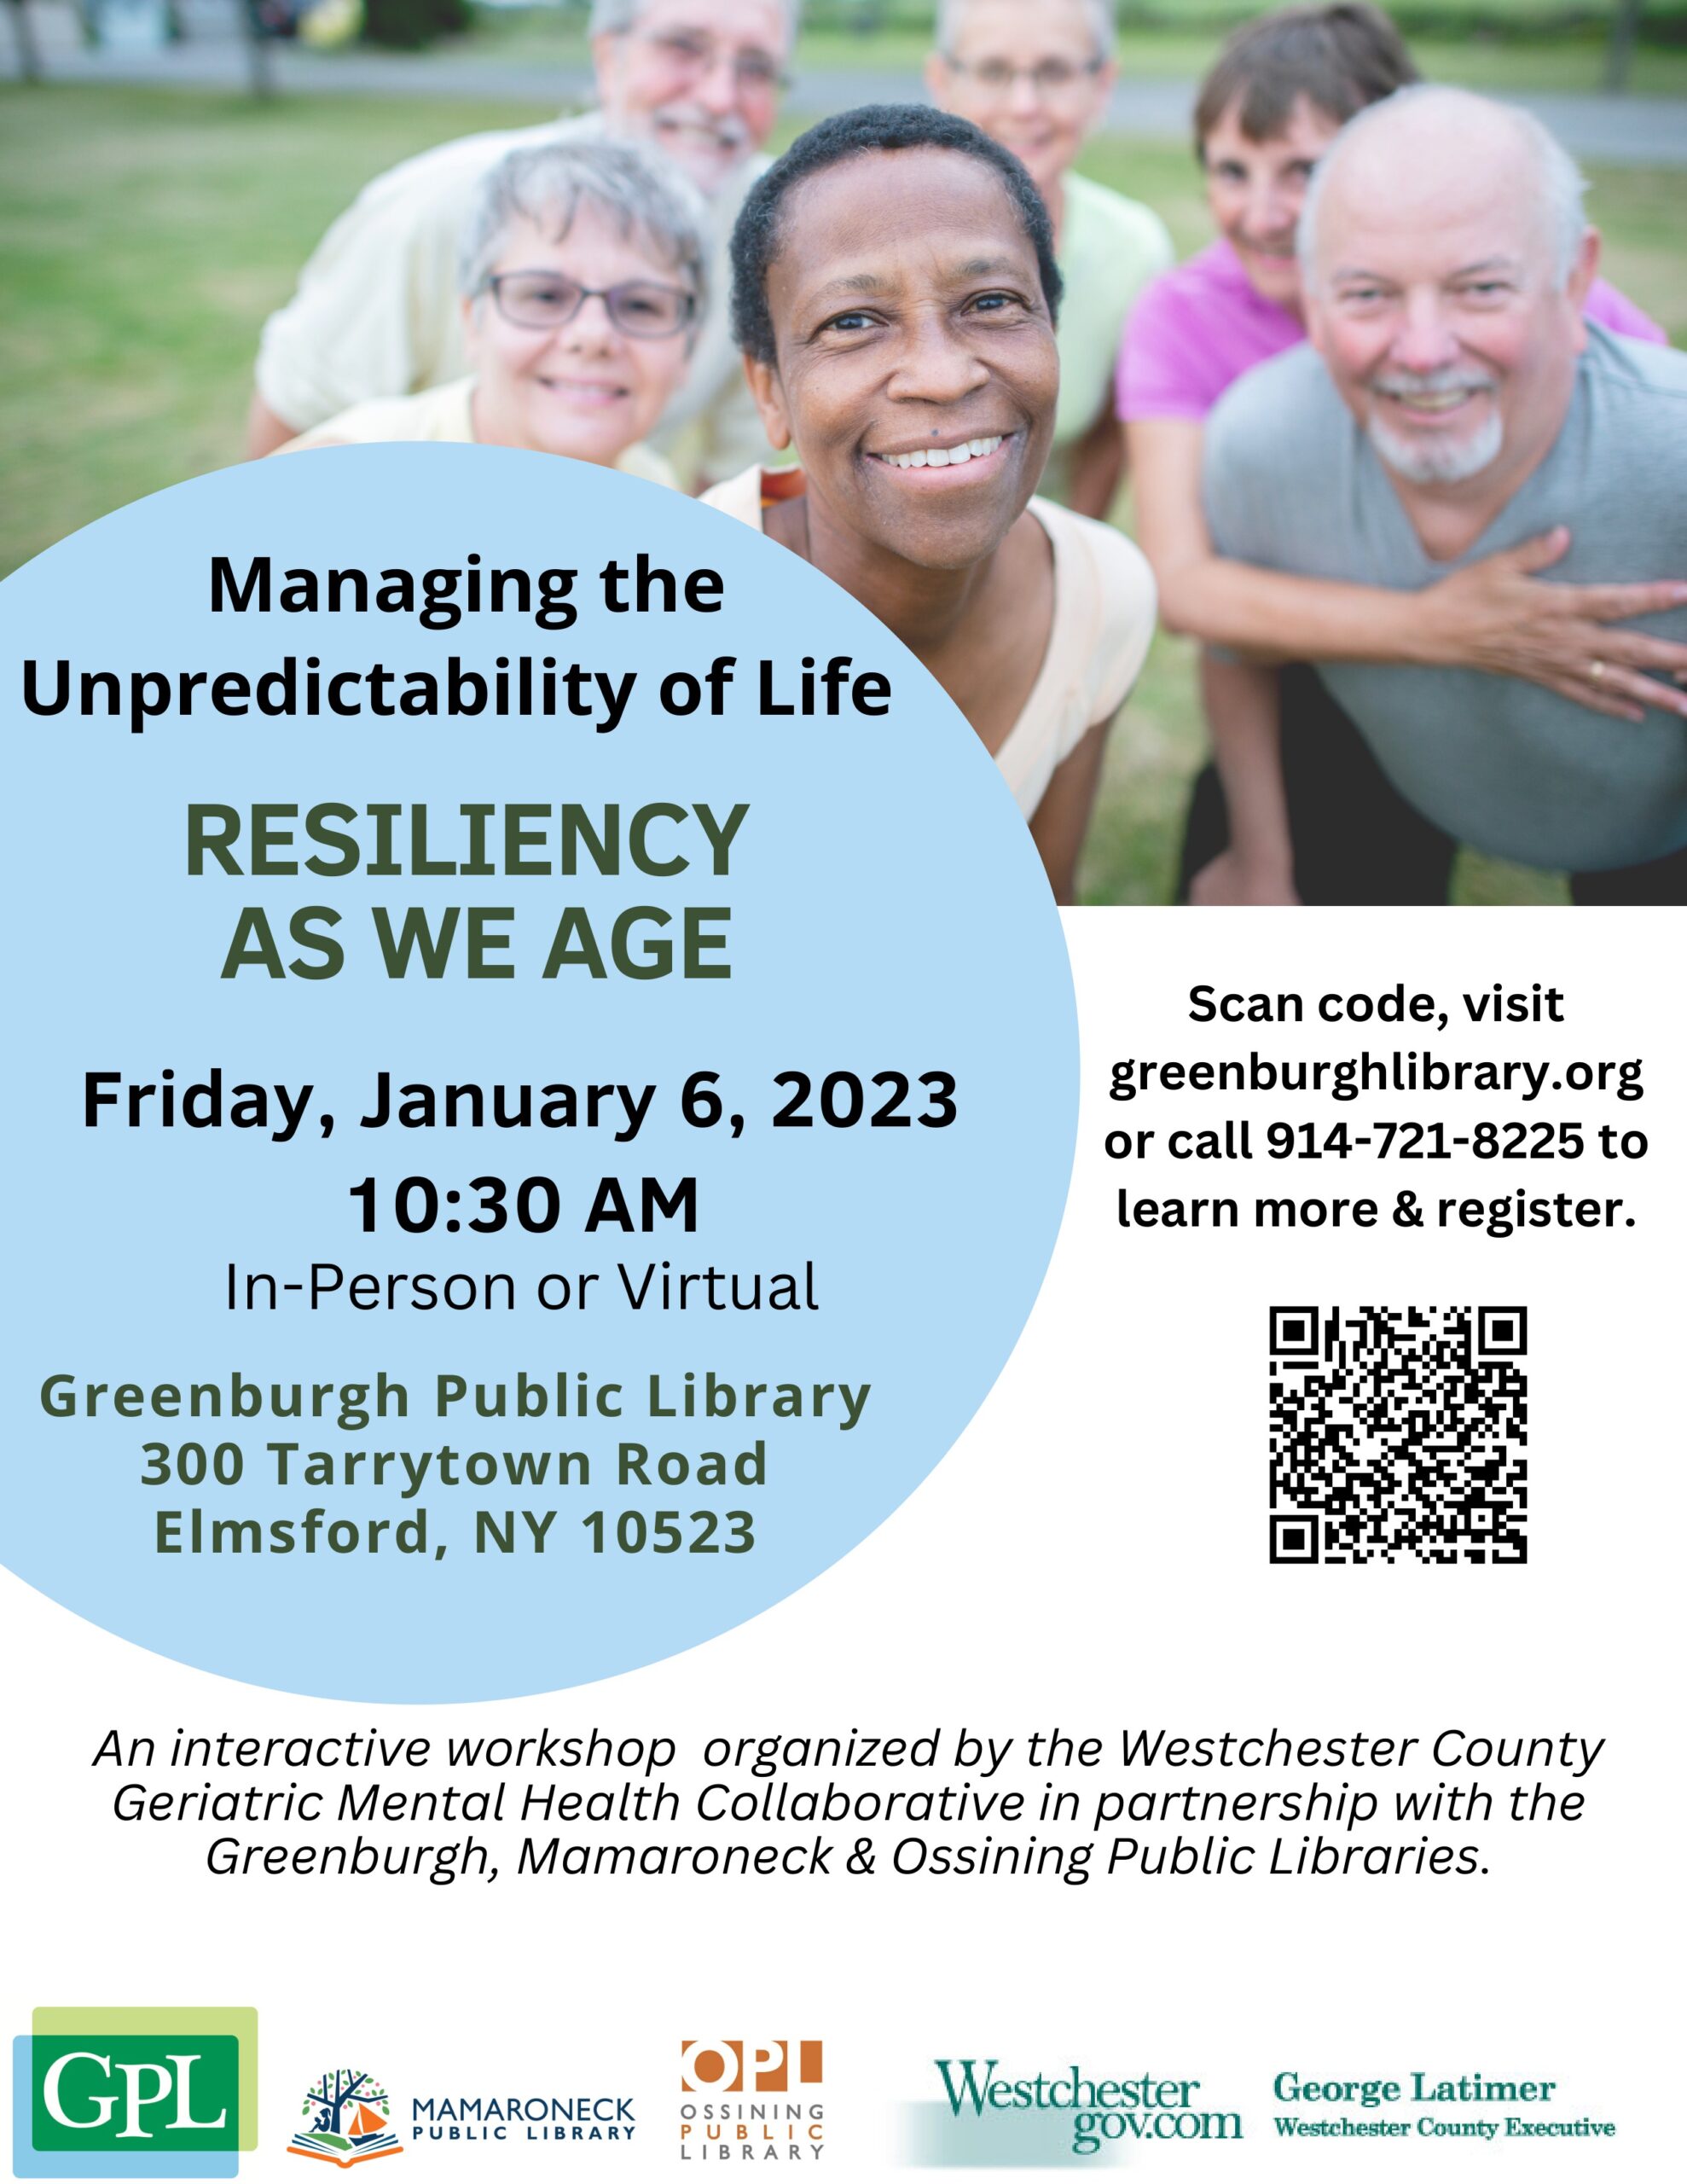 1/6/23 zoom or in-person: Resiliency as we Age